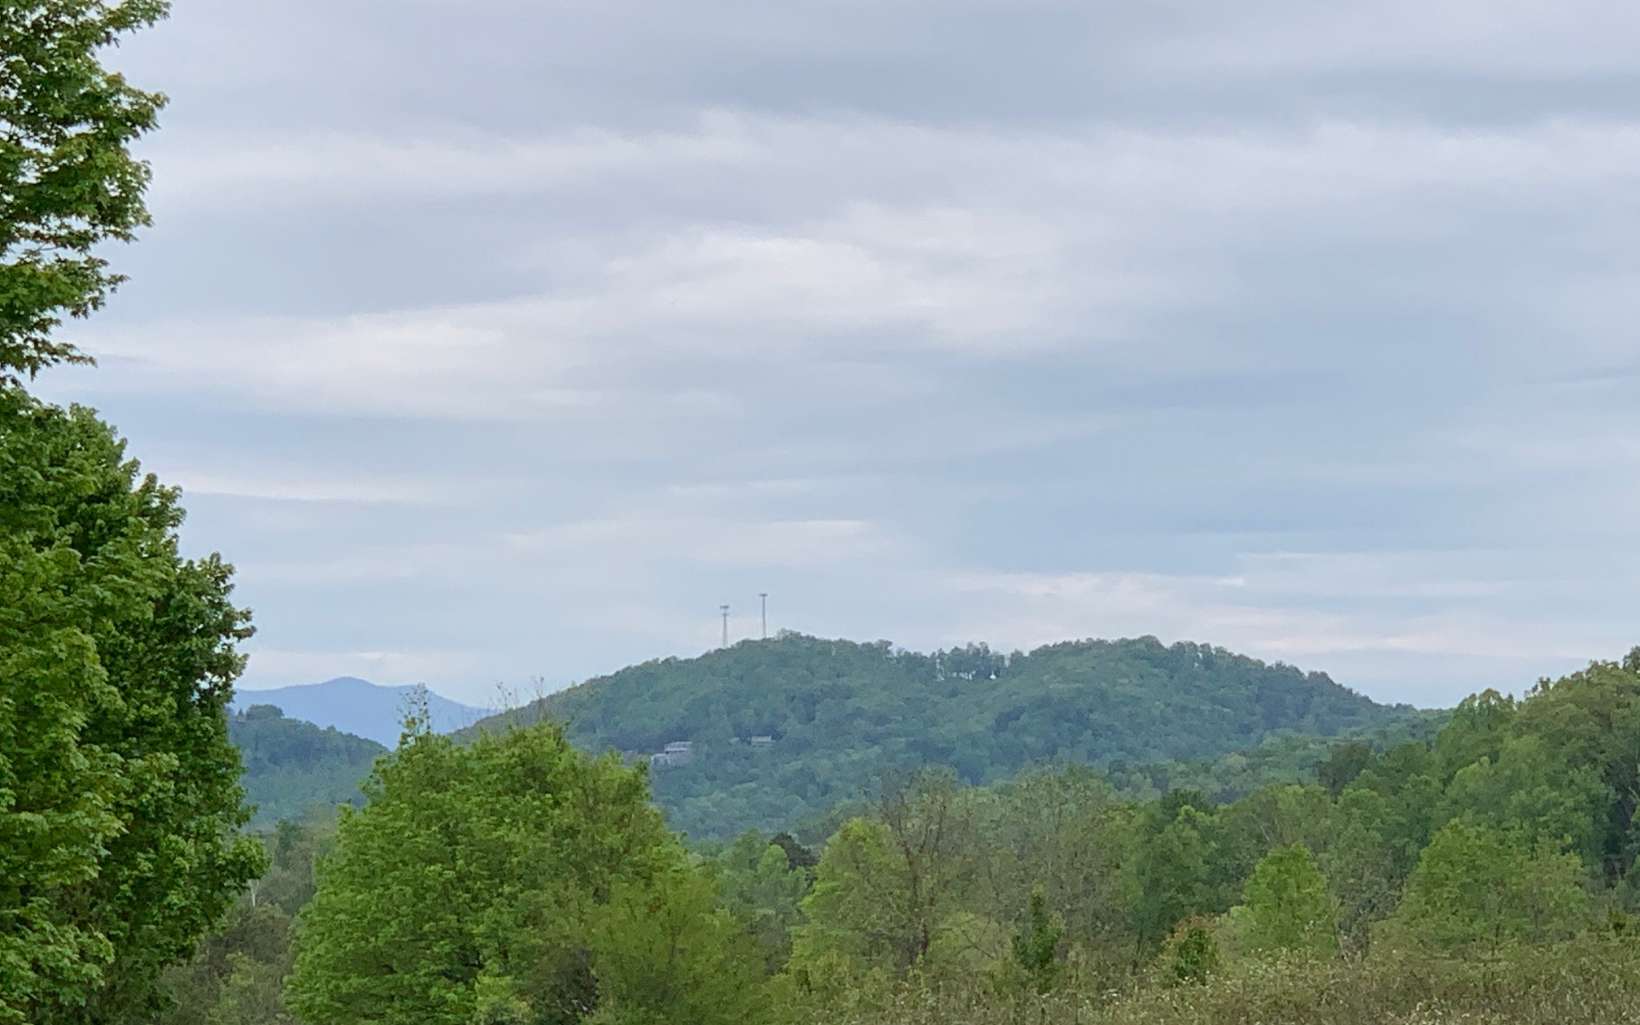 GENTLE 1+ ACRE LOT IN THE MOUNTAINS OF NORTH GEORGIA! Located in a very nice established subdivision, Deerfield, this is a gentle building lot with public utilities and year-round mountain views.